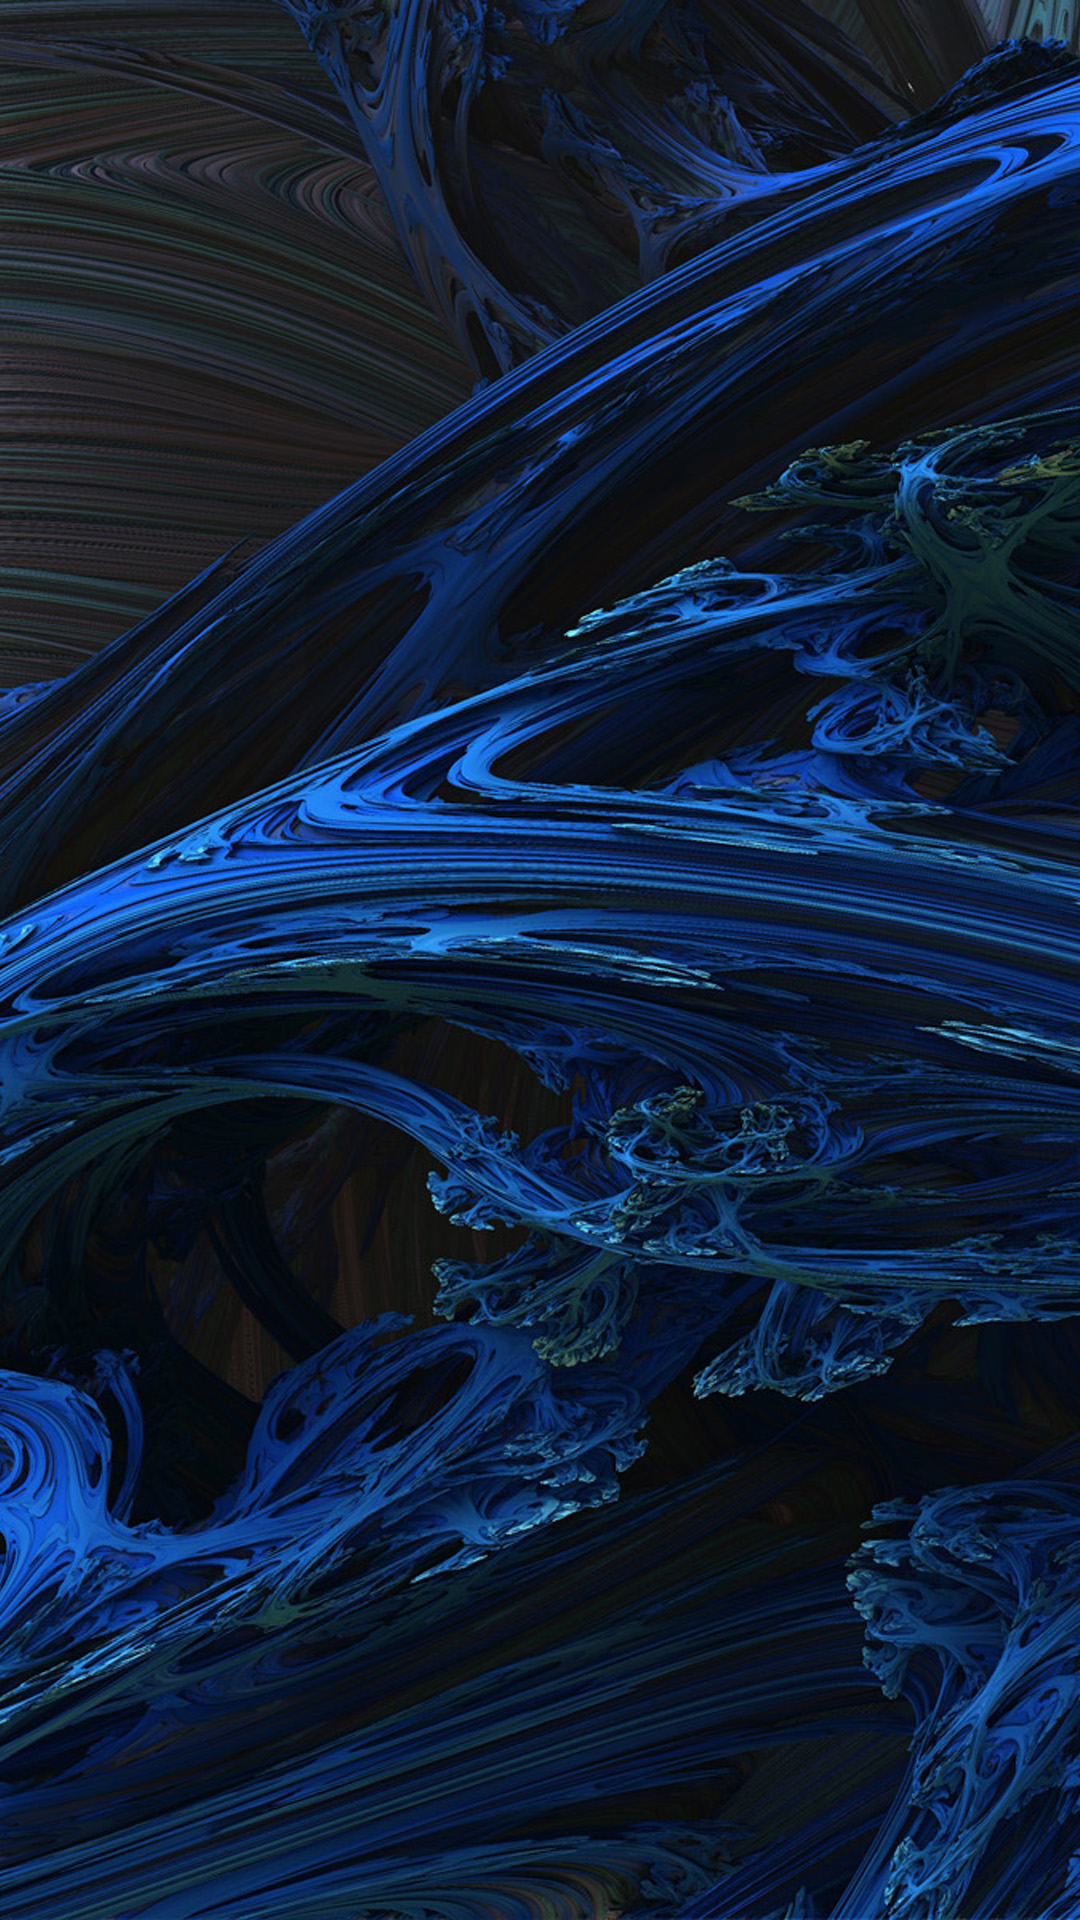 Blue 3d Abstract For Iphone 6 Plus Wallpaper Iphone 6 Plus Wallpaper Iphone12 スマホ壁紙 待受画像ギャラリー